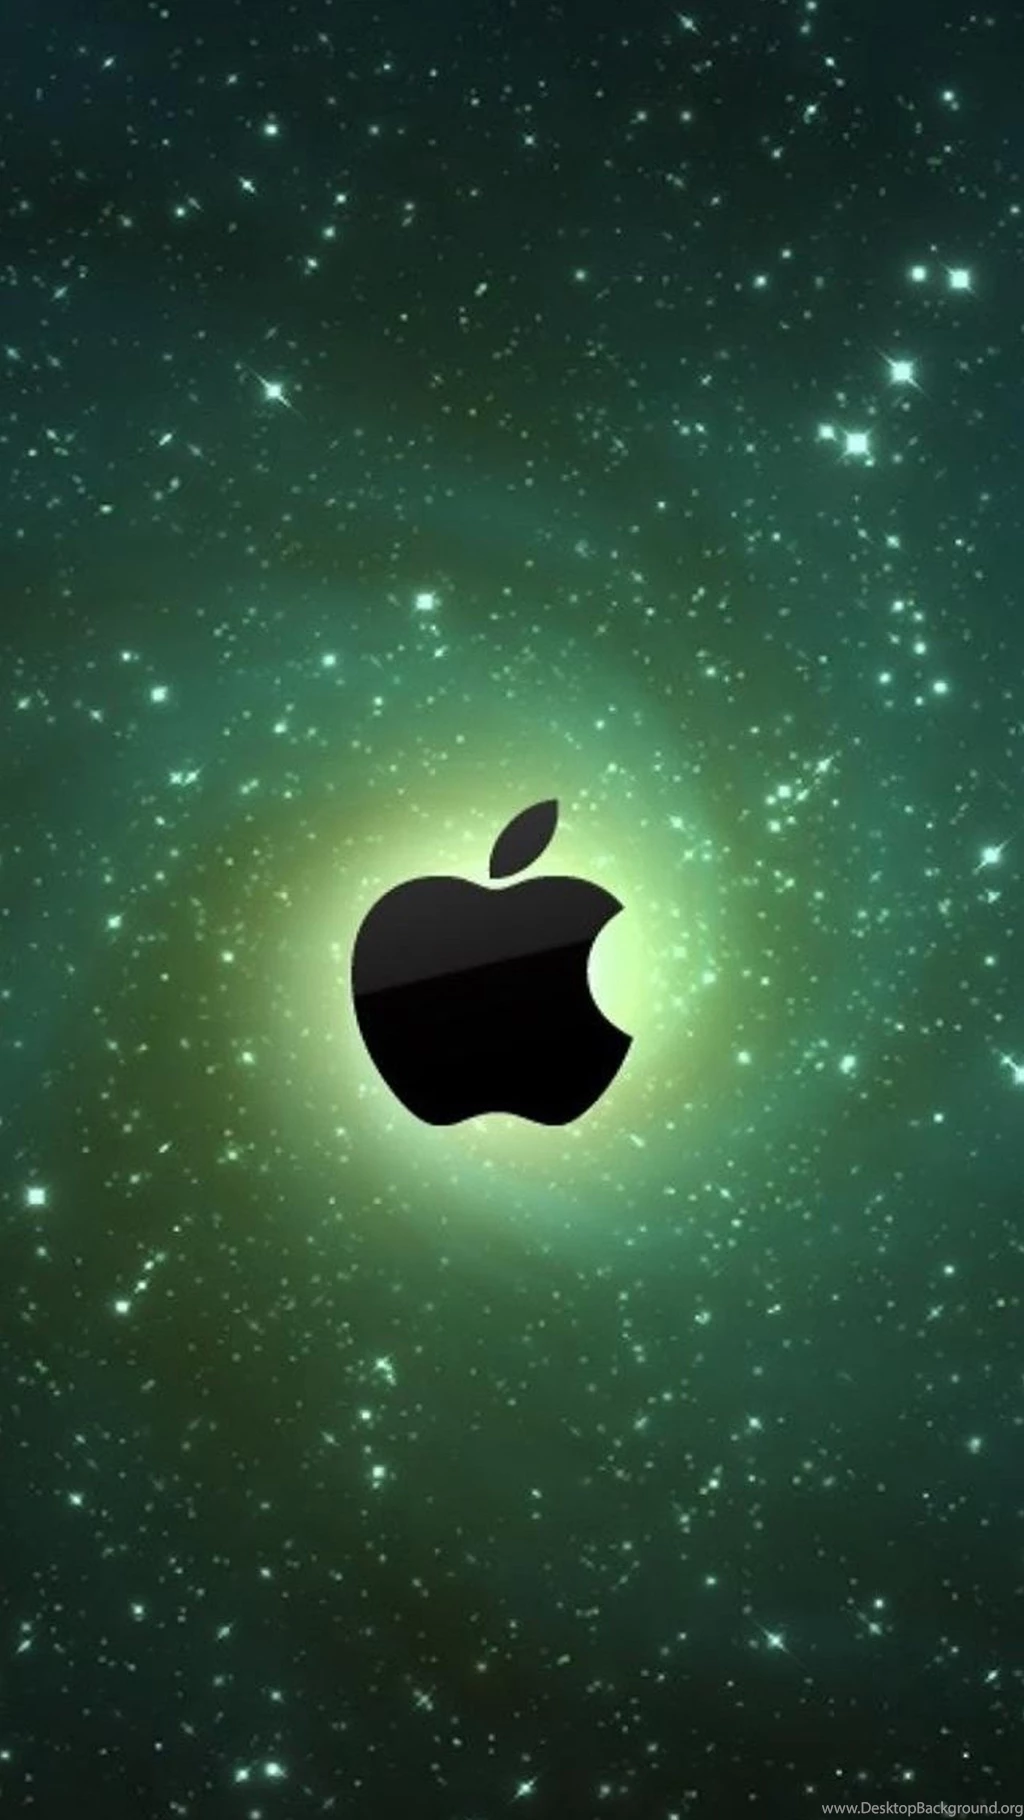 Awesome Apple Logo 10 Galaxy S6 Wallpapers Desktop Background Images, Photos, Reviews